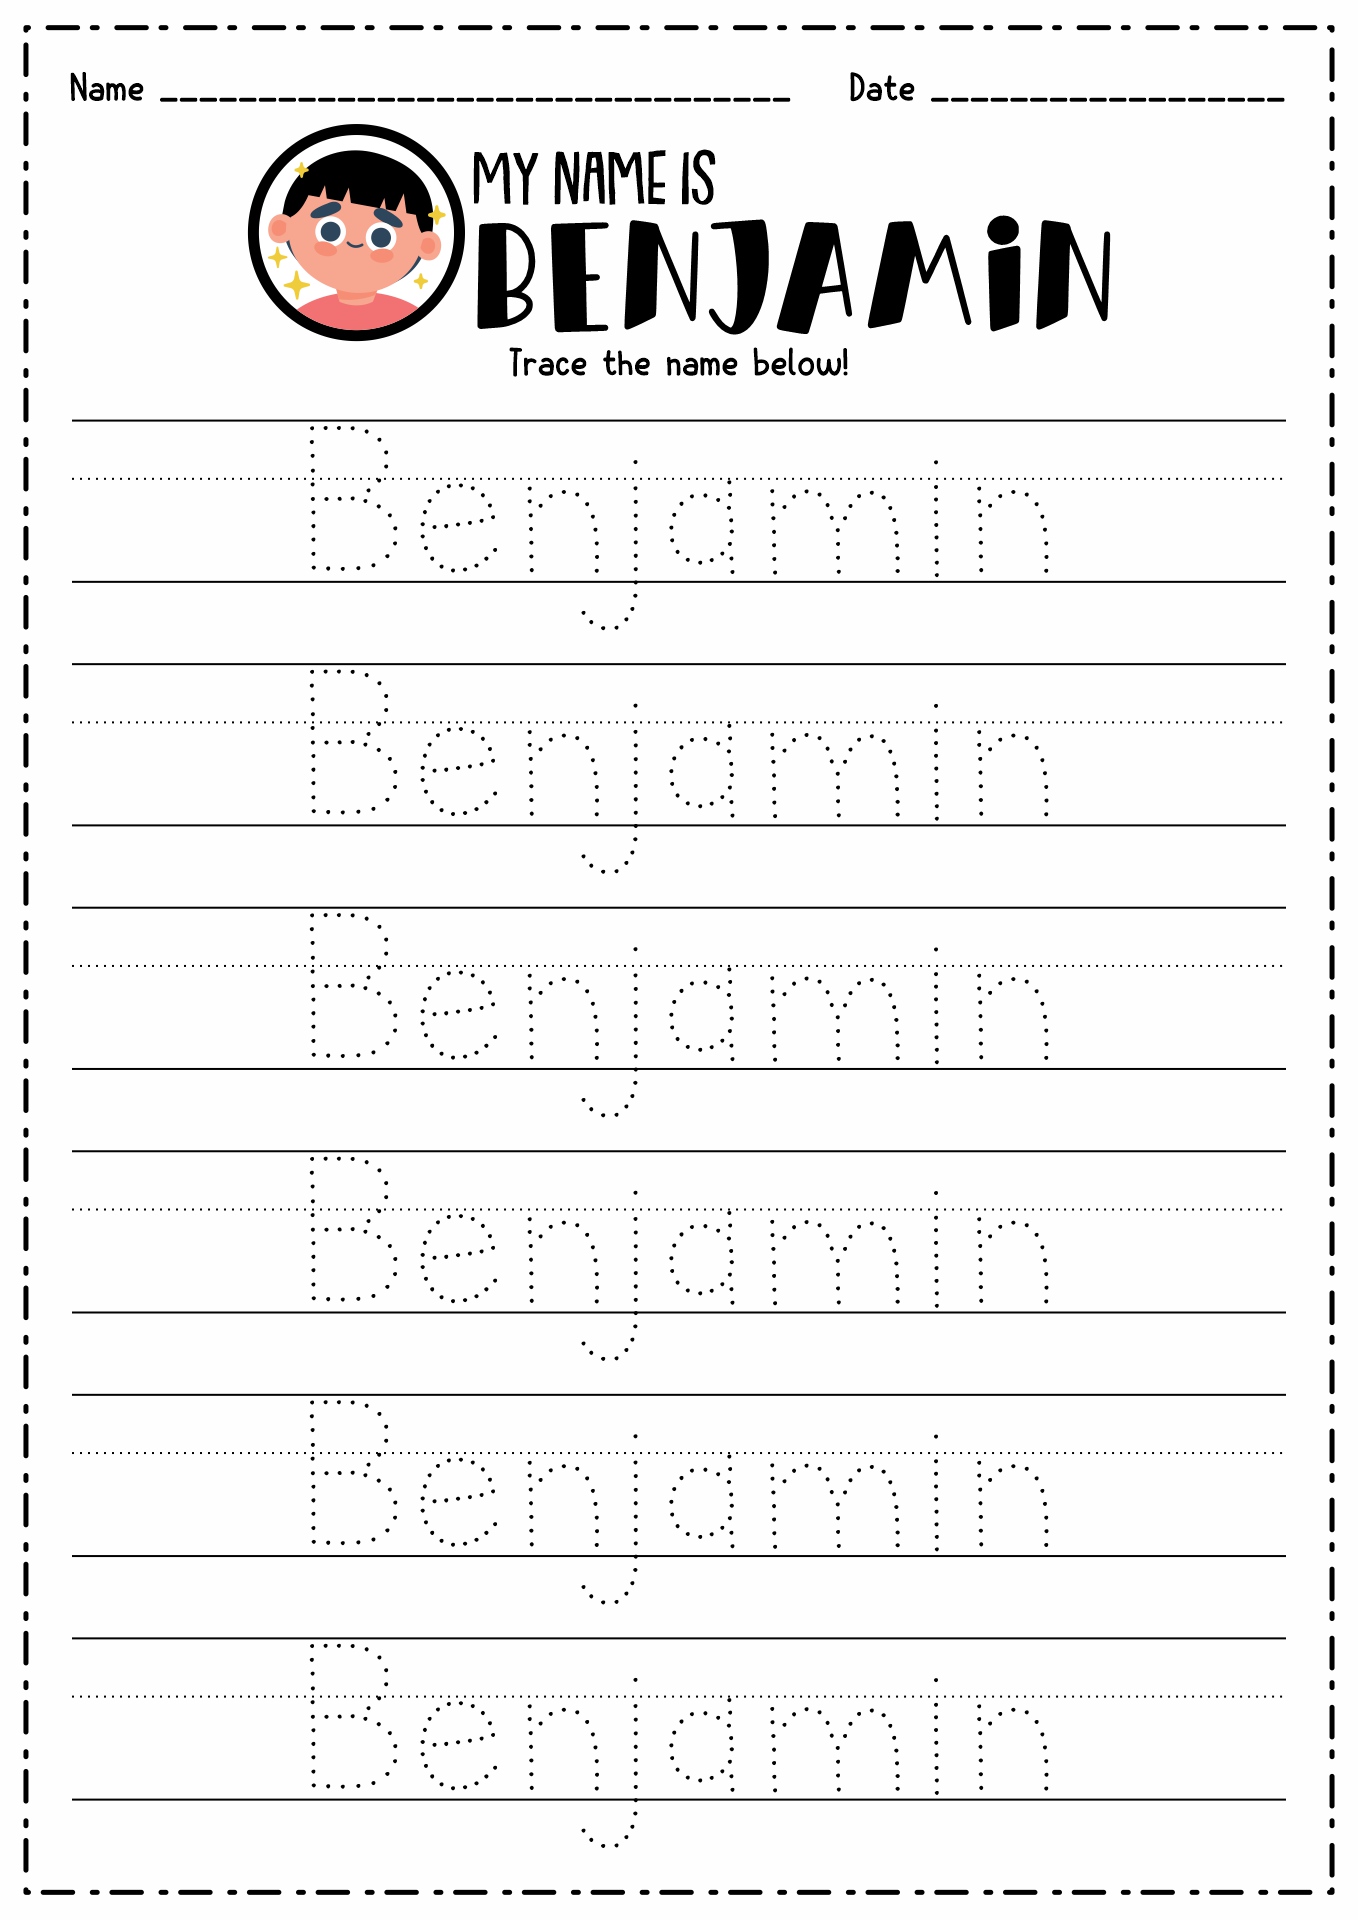 Create Your Own Tracing Name Worksheet Image